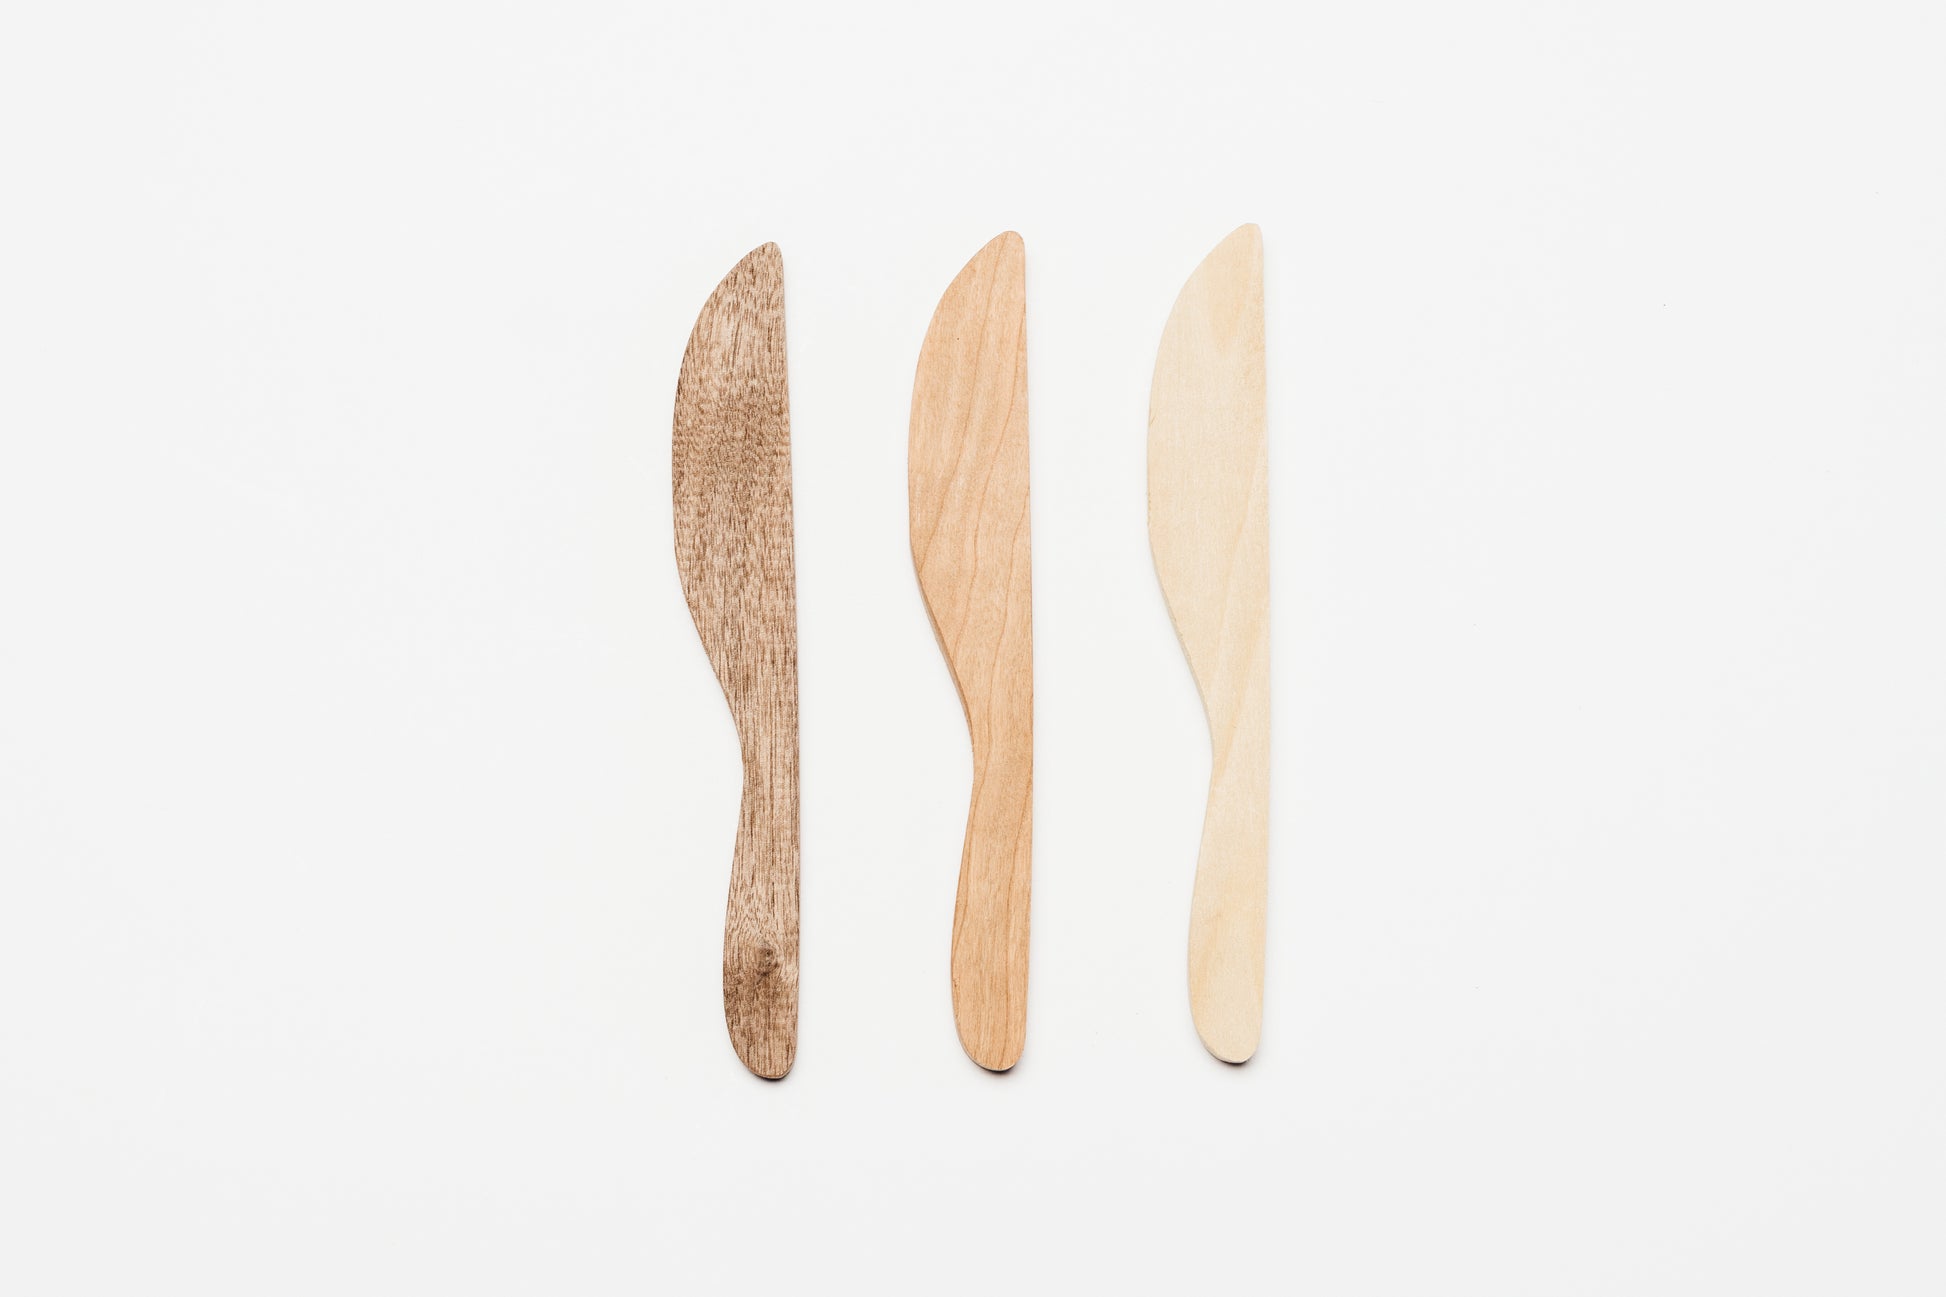 Butter knife carving blank in walnut, cherry, and poplar. By Melanie Abrantes Designs.